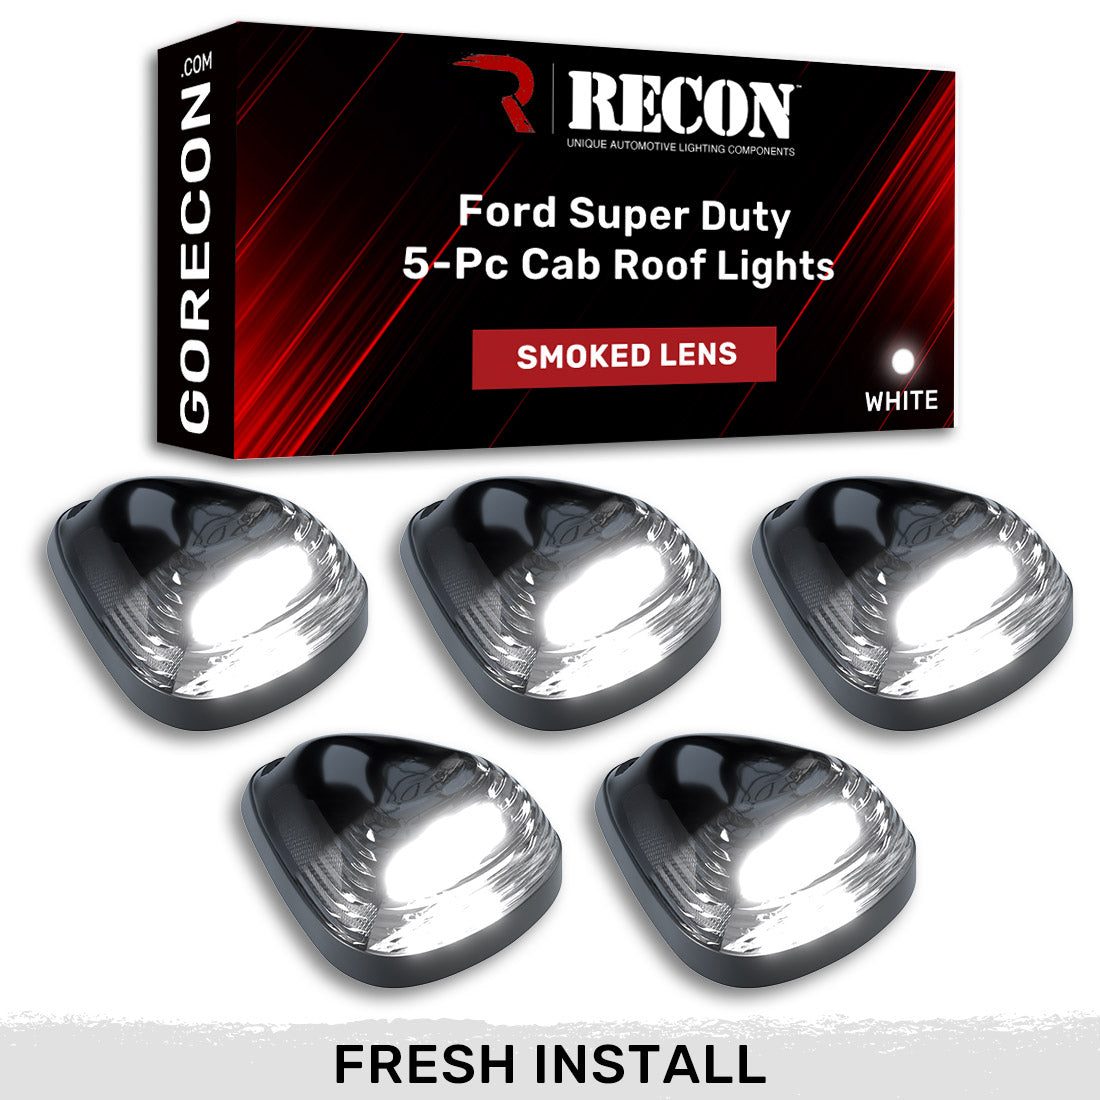 Ford Truck LED Lights & Accessories | Gorecon.com